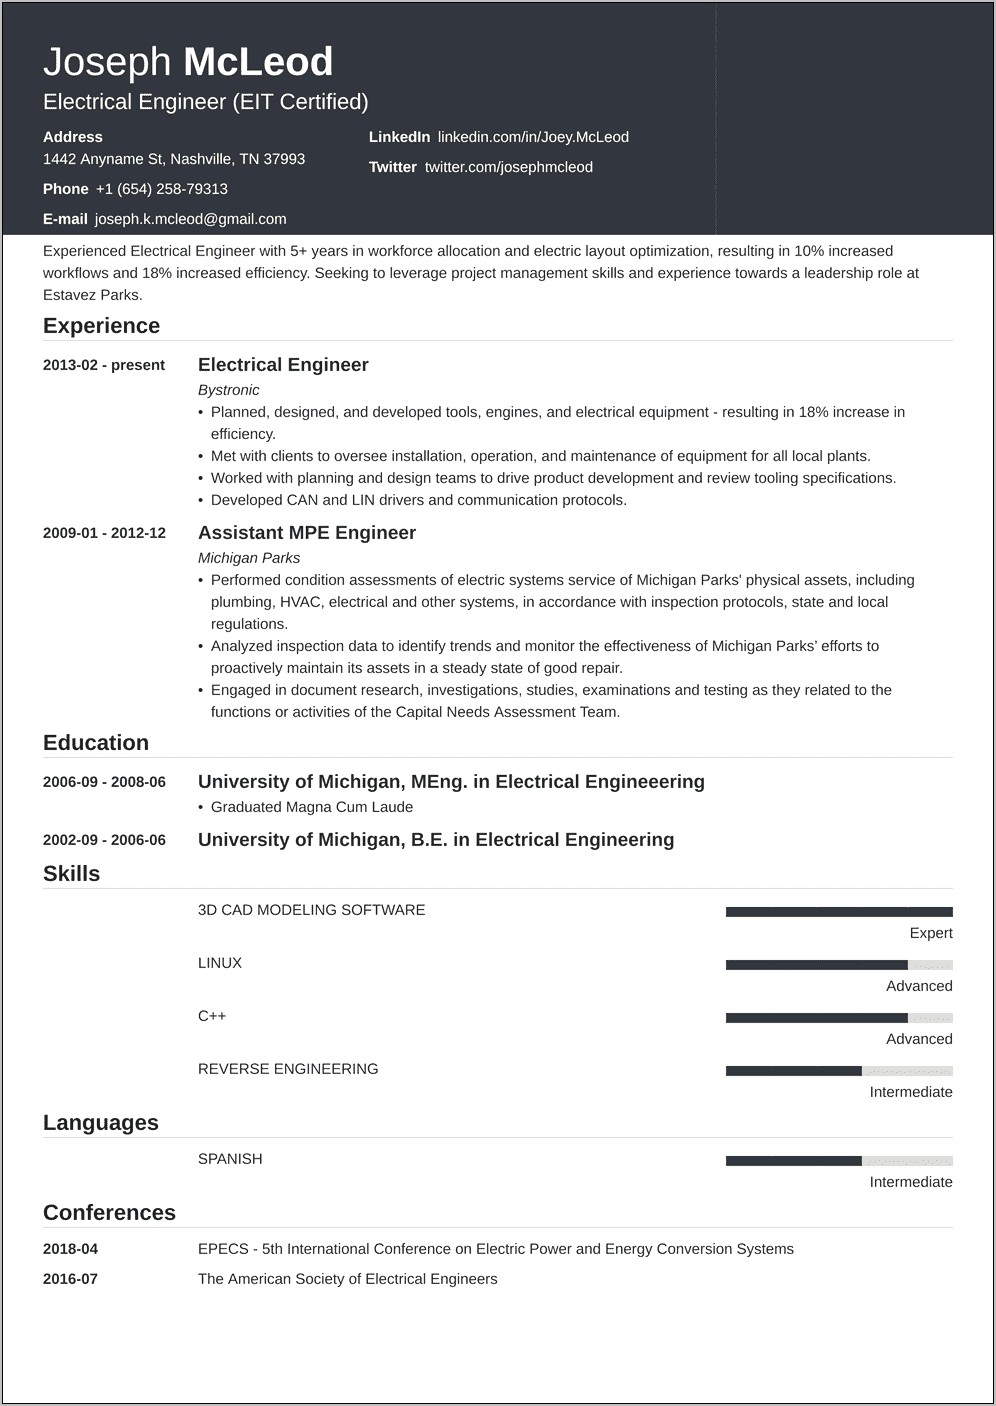 Electrical Site Engineer Experience Resume Format